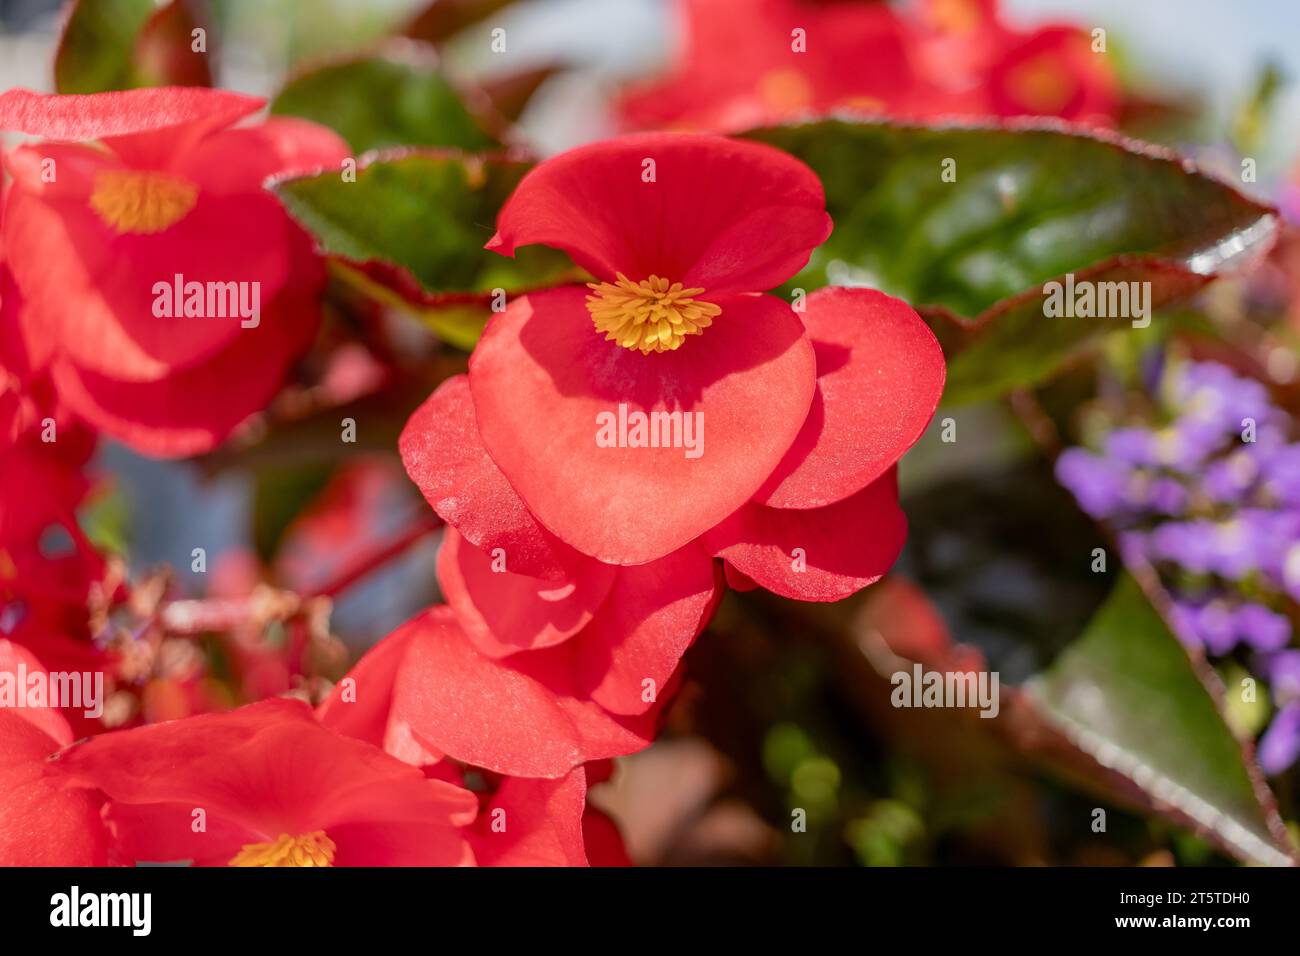 Red begonia flowers - close-up - vibrant colors - garden setting Stock Photo